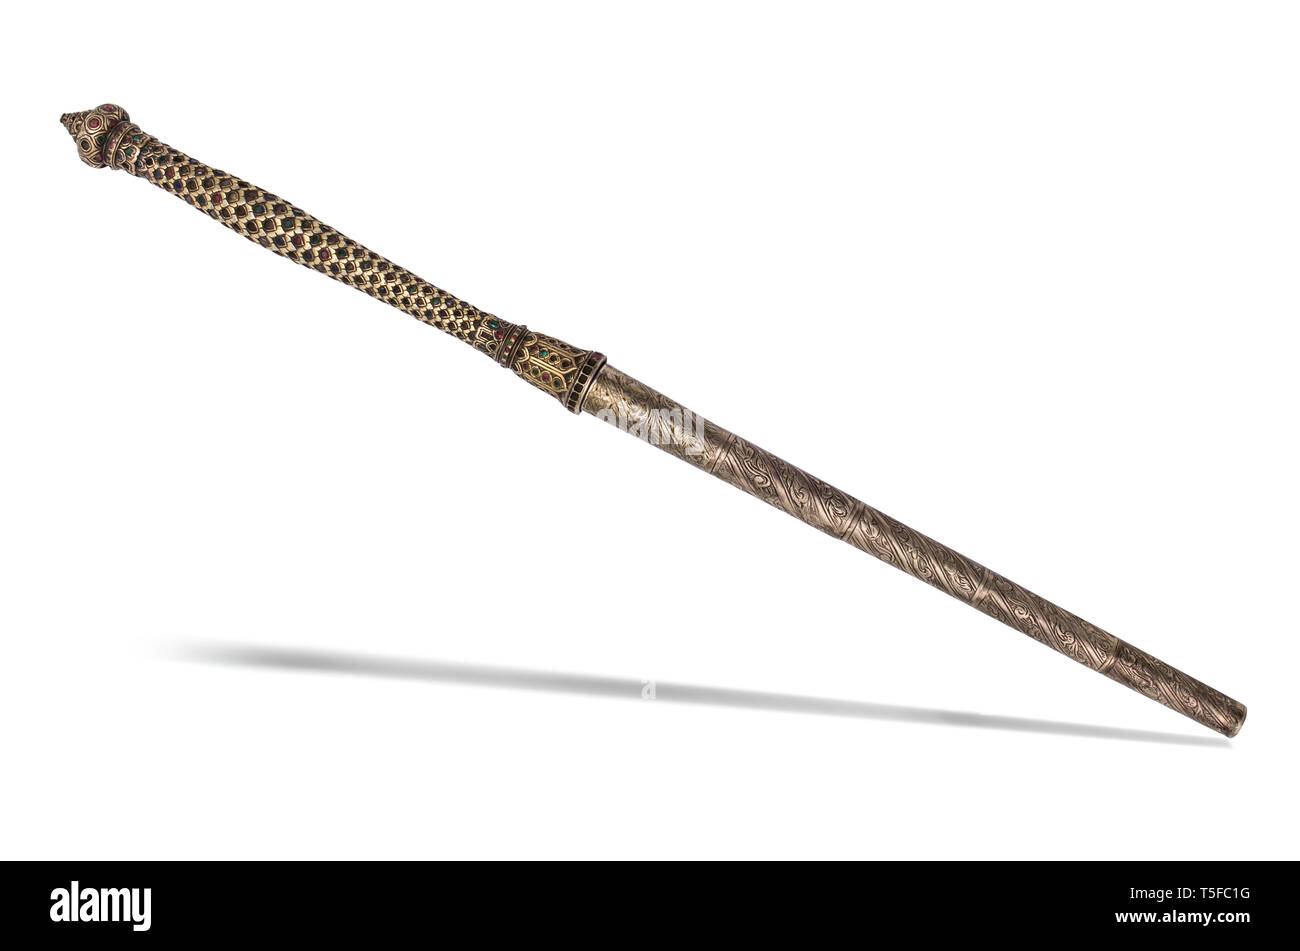 The thai scepter of the 19th century.  A sceptre or scepter (AE) is a symbolic ornamental staff or wand held in the hand by a ruling monarch as an ite Stock Photo